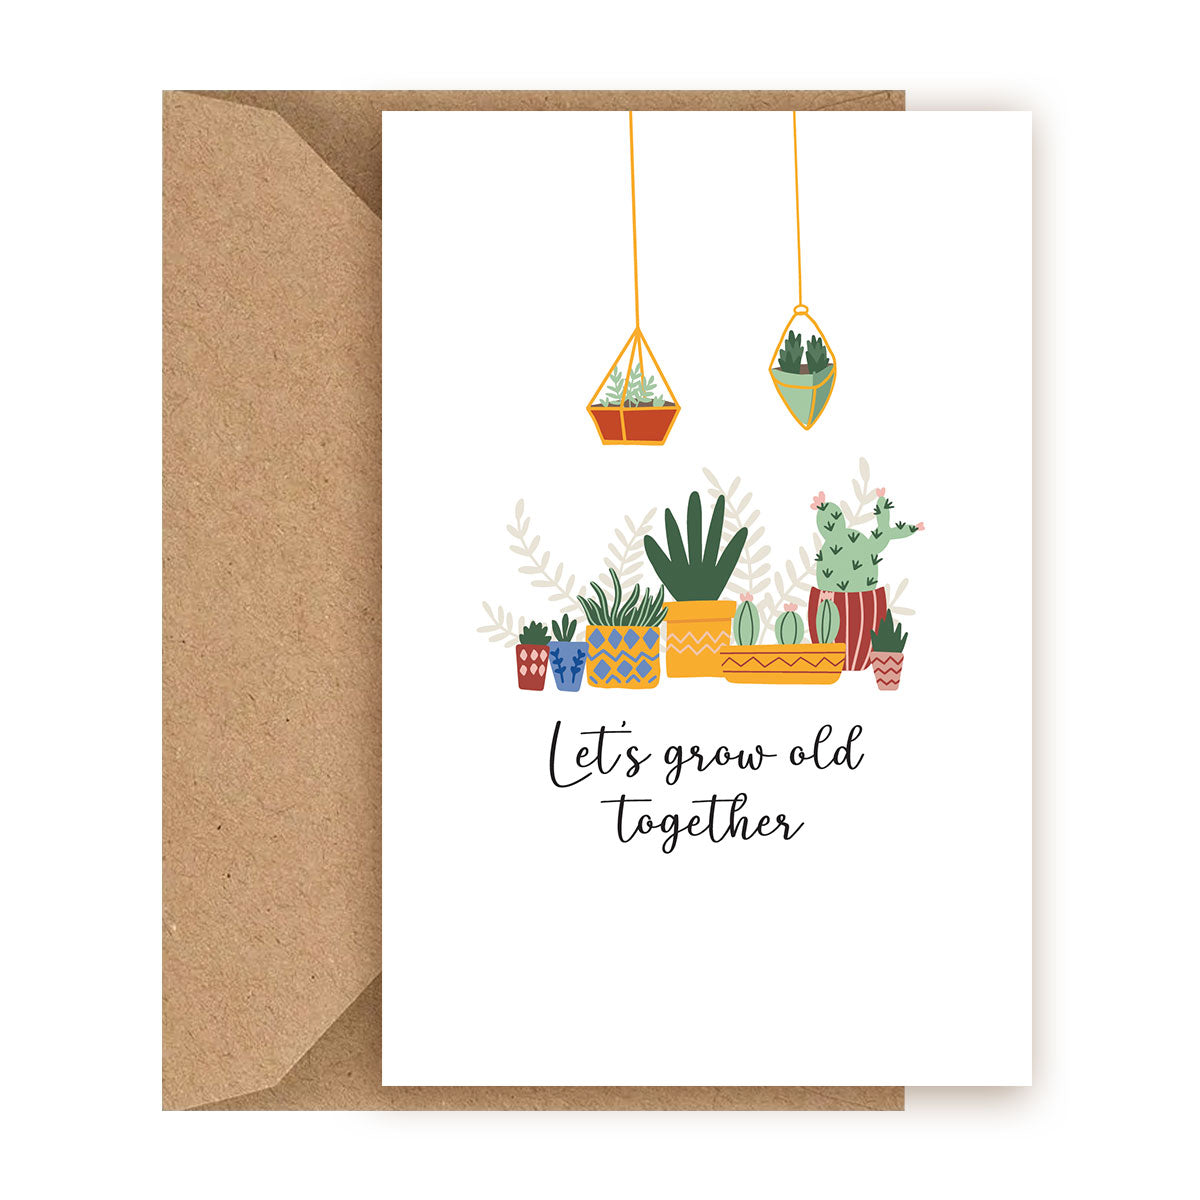 Lets Grow Old Together Card for sale, Succulent Card for sale, Cactus Greeting Card, Succulents Greeting Card, Succulents Gift Ideas